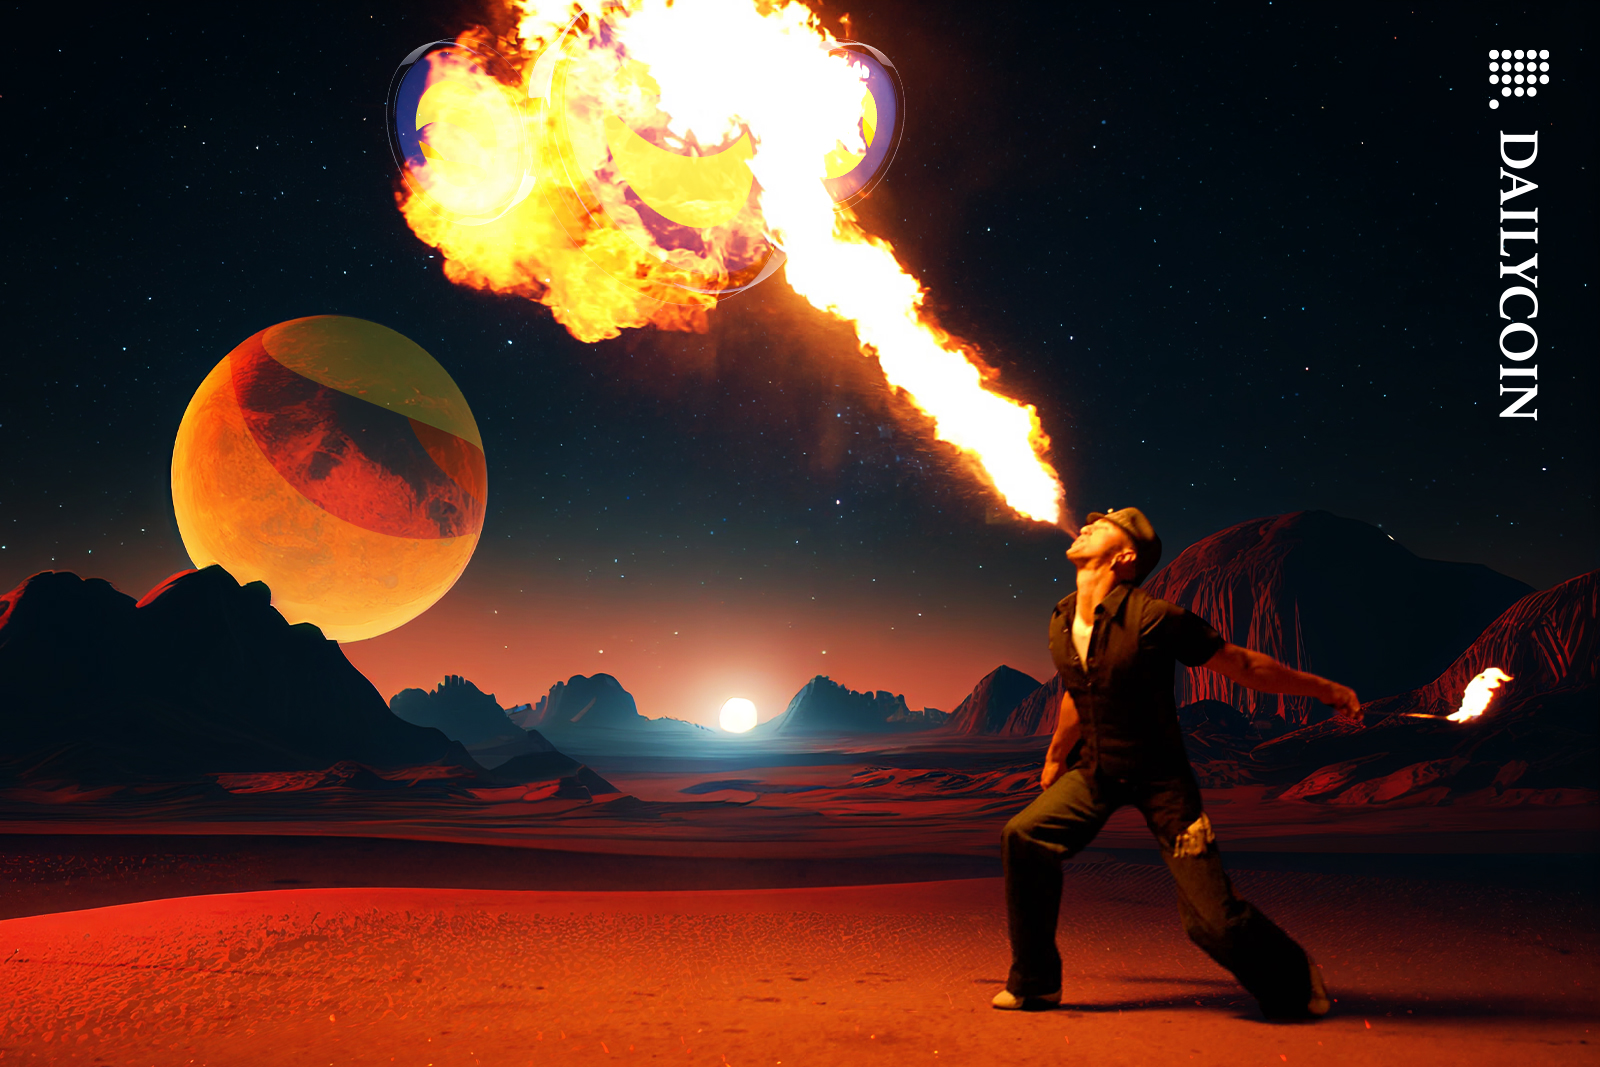 Man fire breathing on LUNC coins. In mars with a TERRA moon.